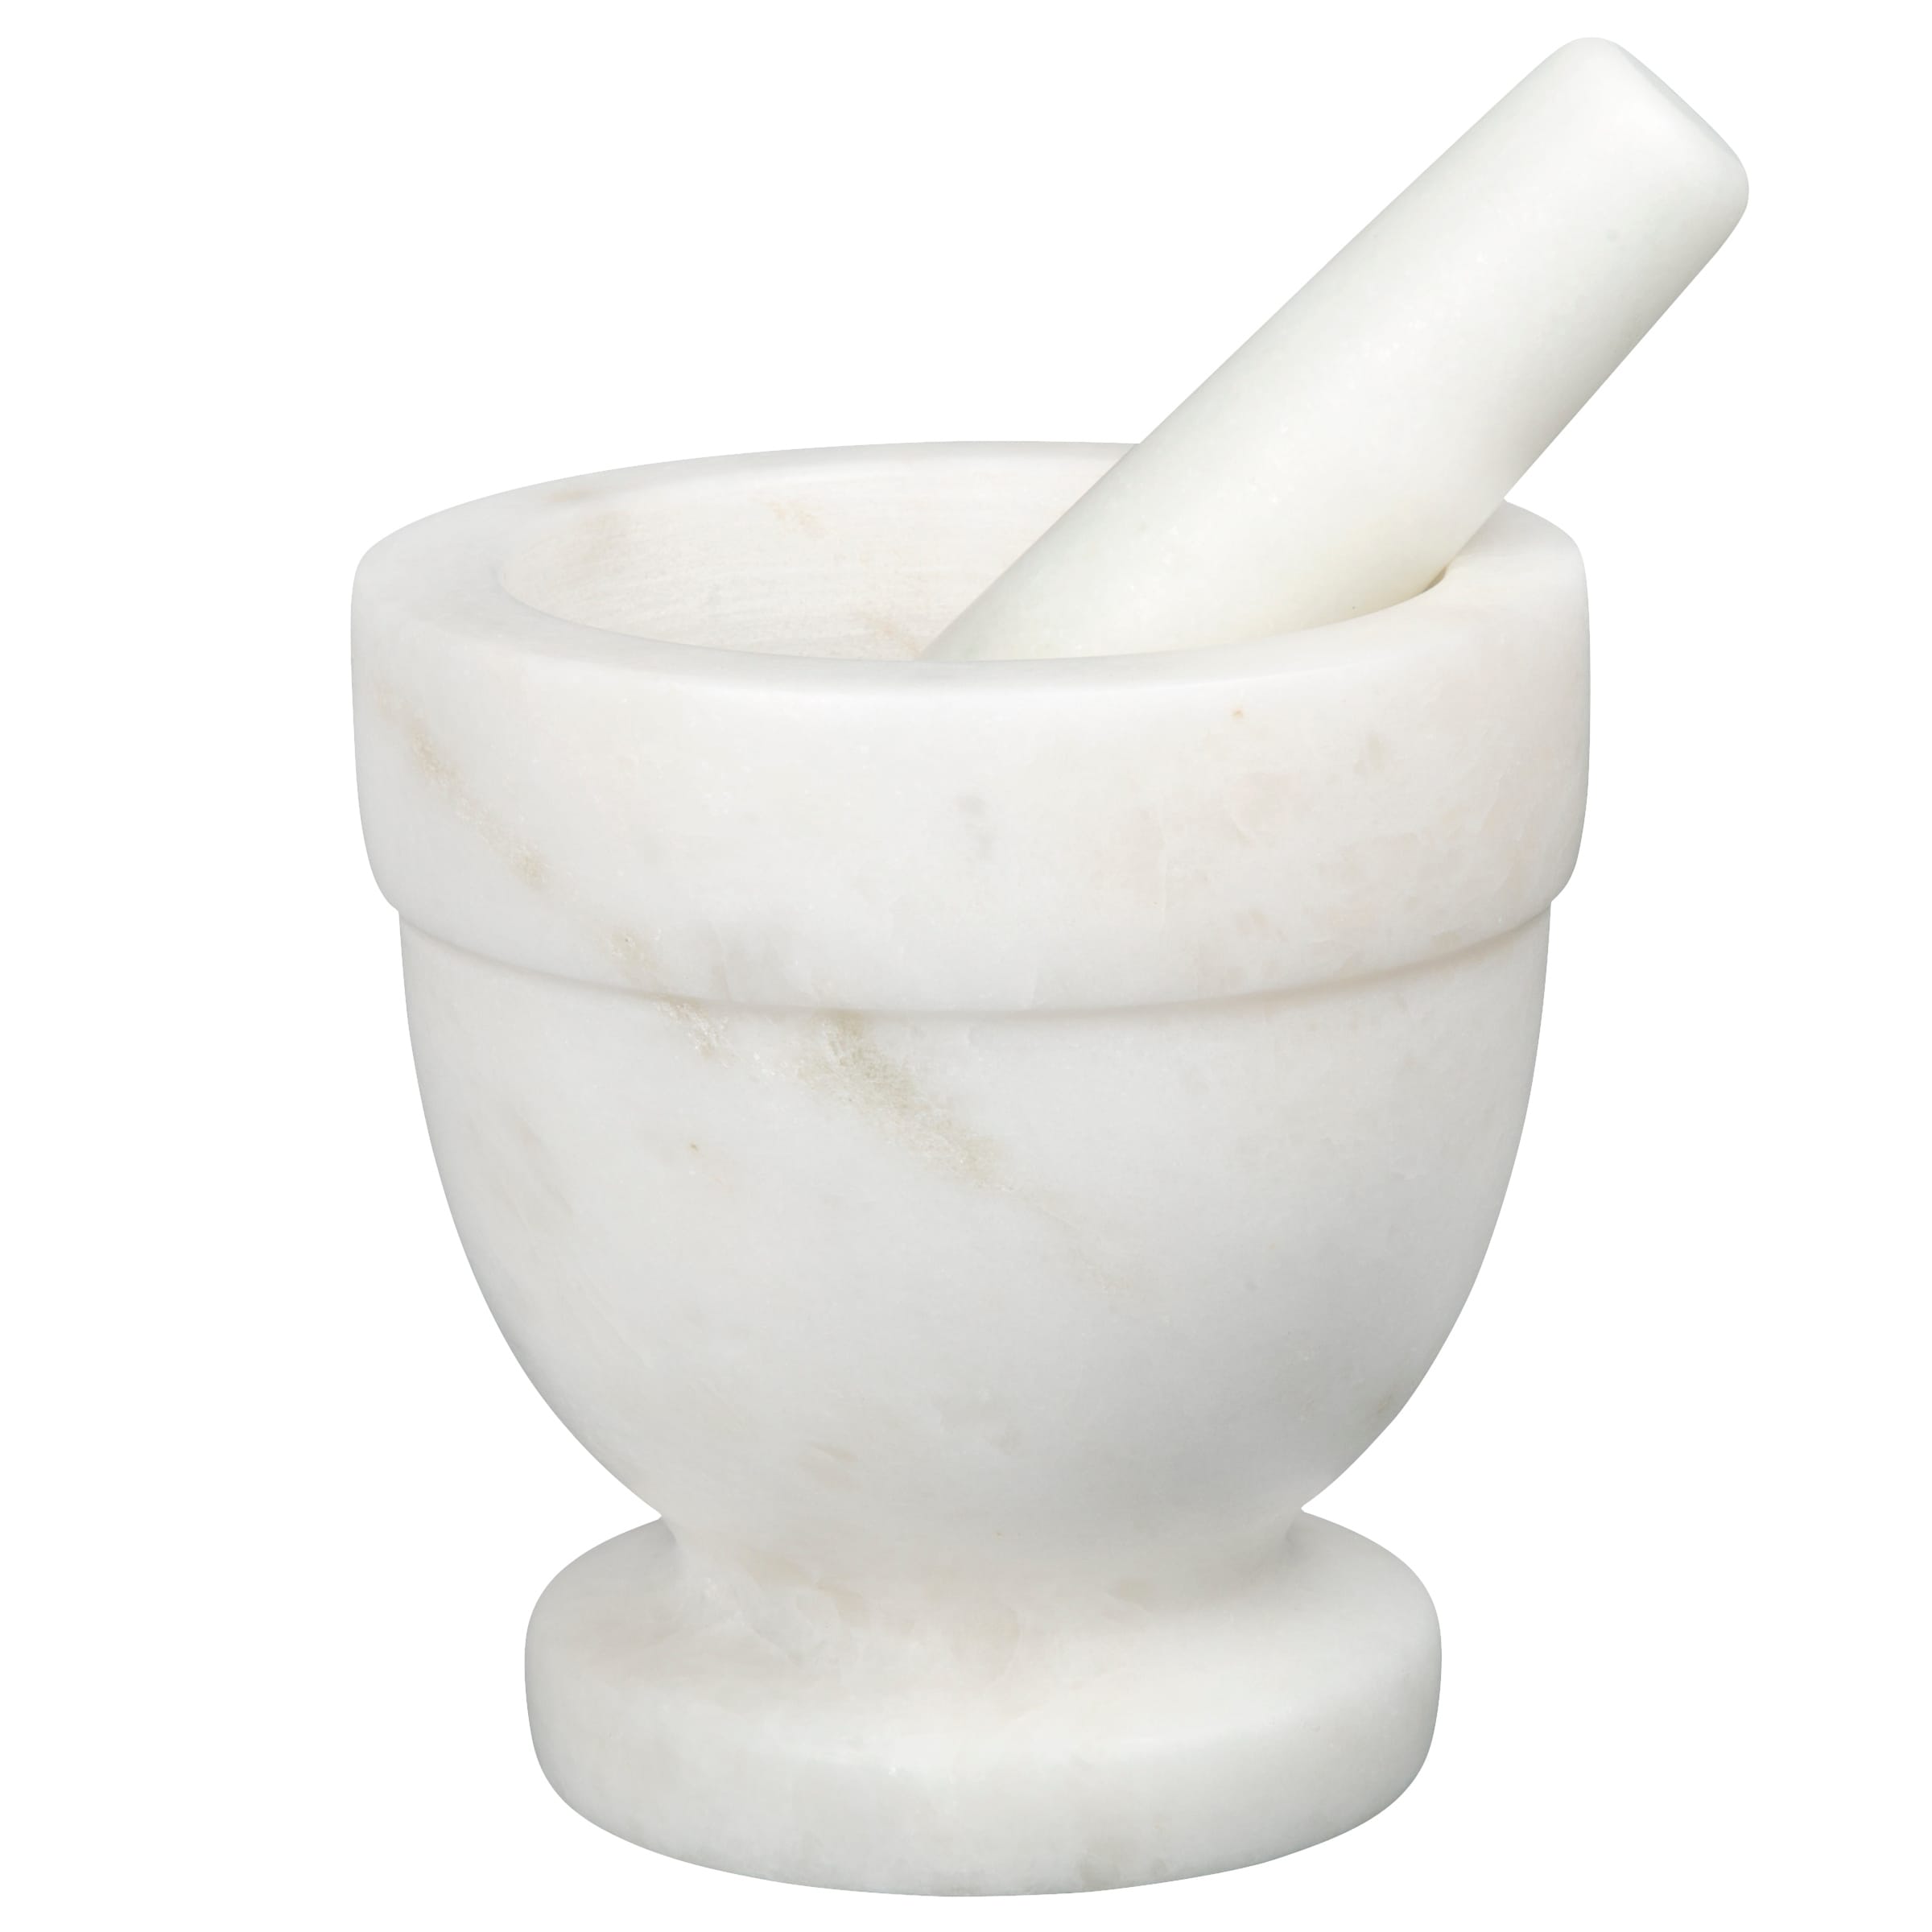 Bene Casa wooden mortar and pestle, 5.2-inches high, herb crusher